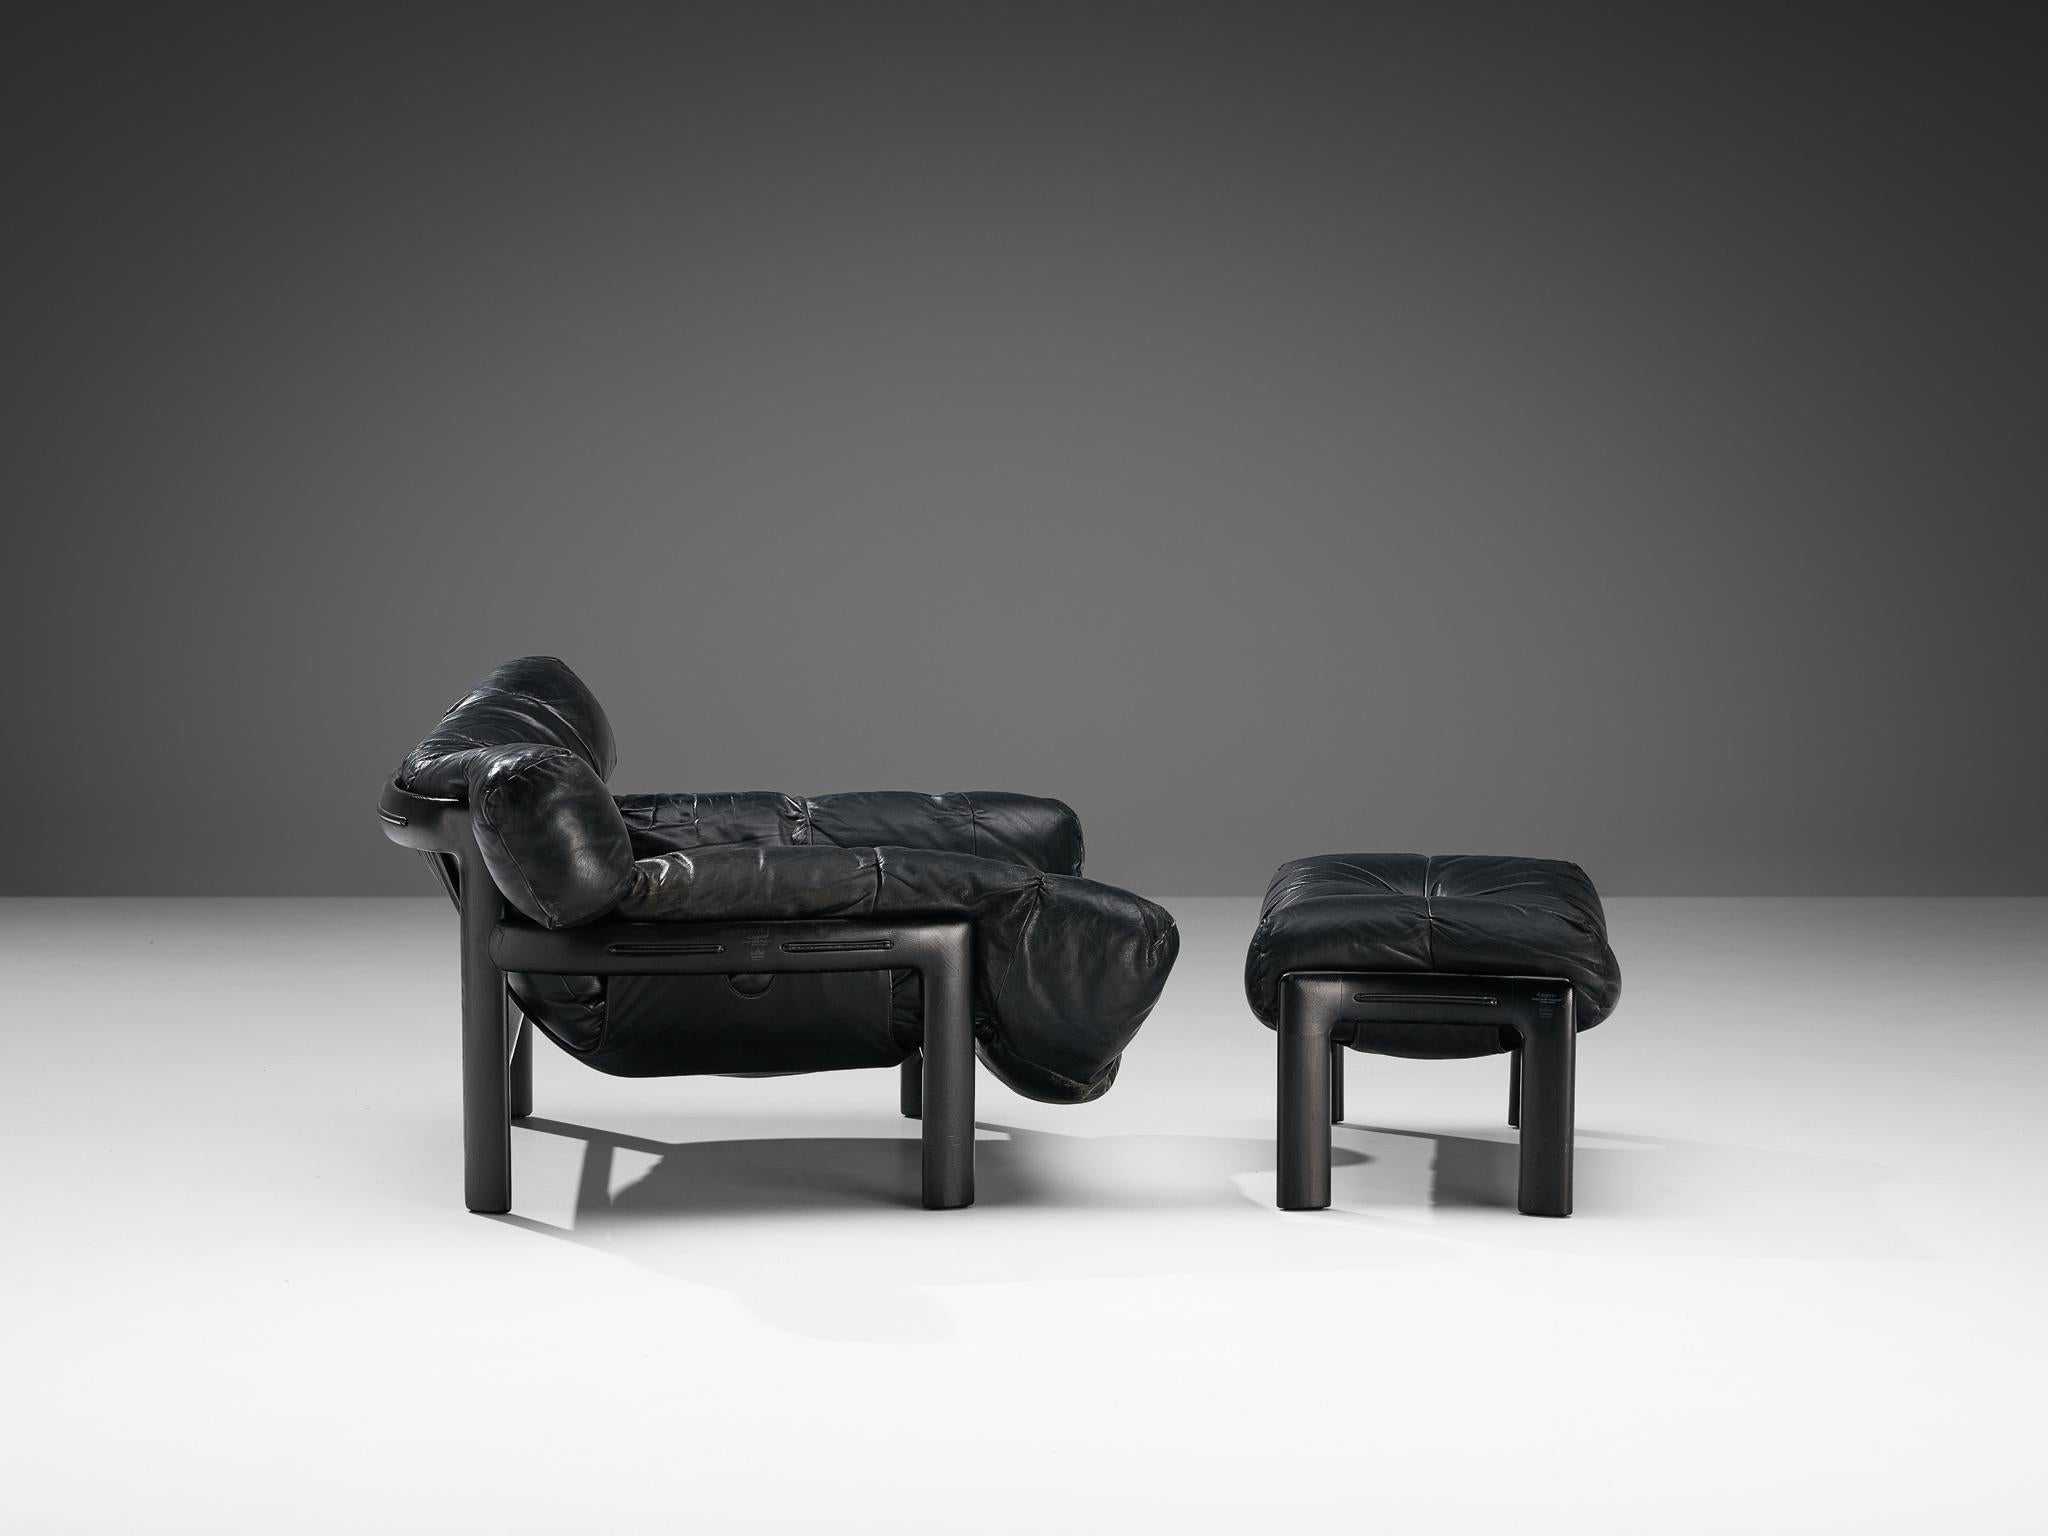 Leather Angelo Mangiarotti & Chiara Pampo 'Légère' Lounge Chair with Ottoman  For Sale